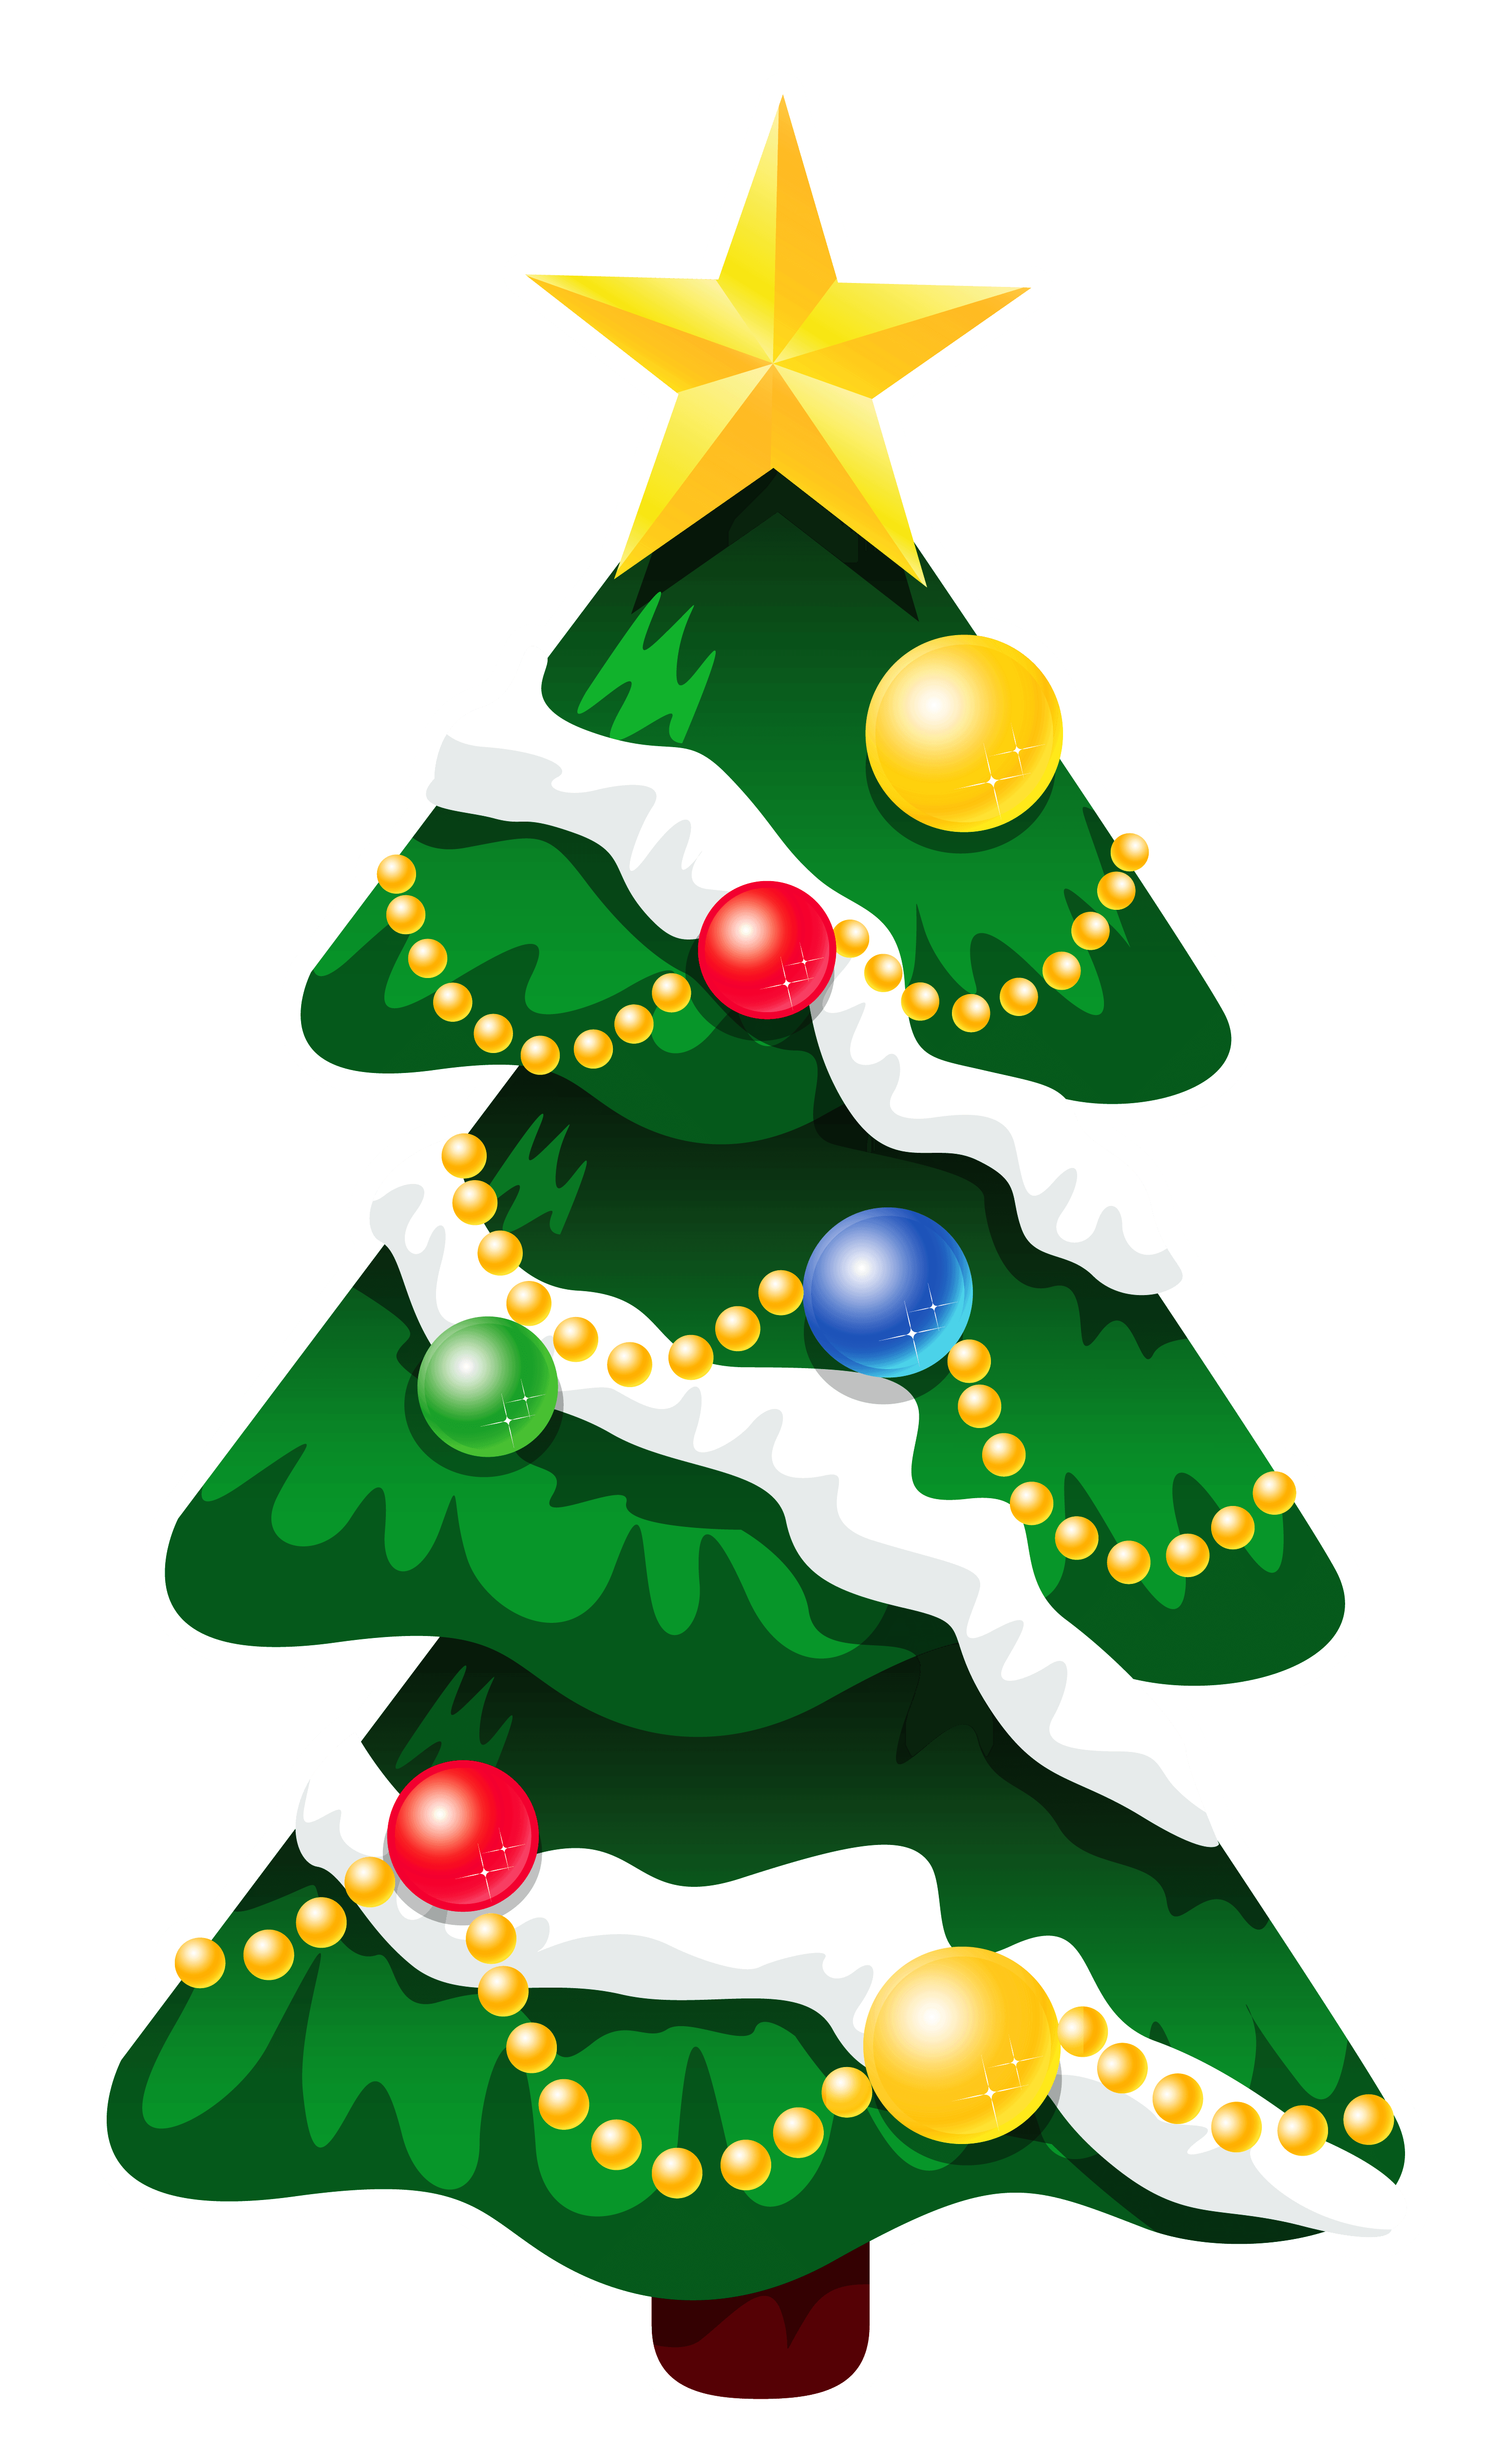 Free Snowy Tree Png, Download Free Snowy Tree Png png images, Free ...